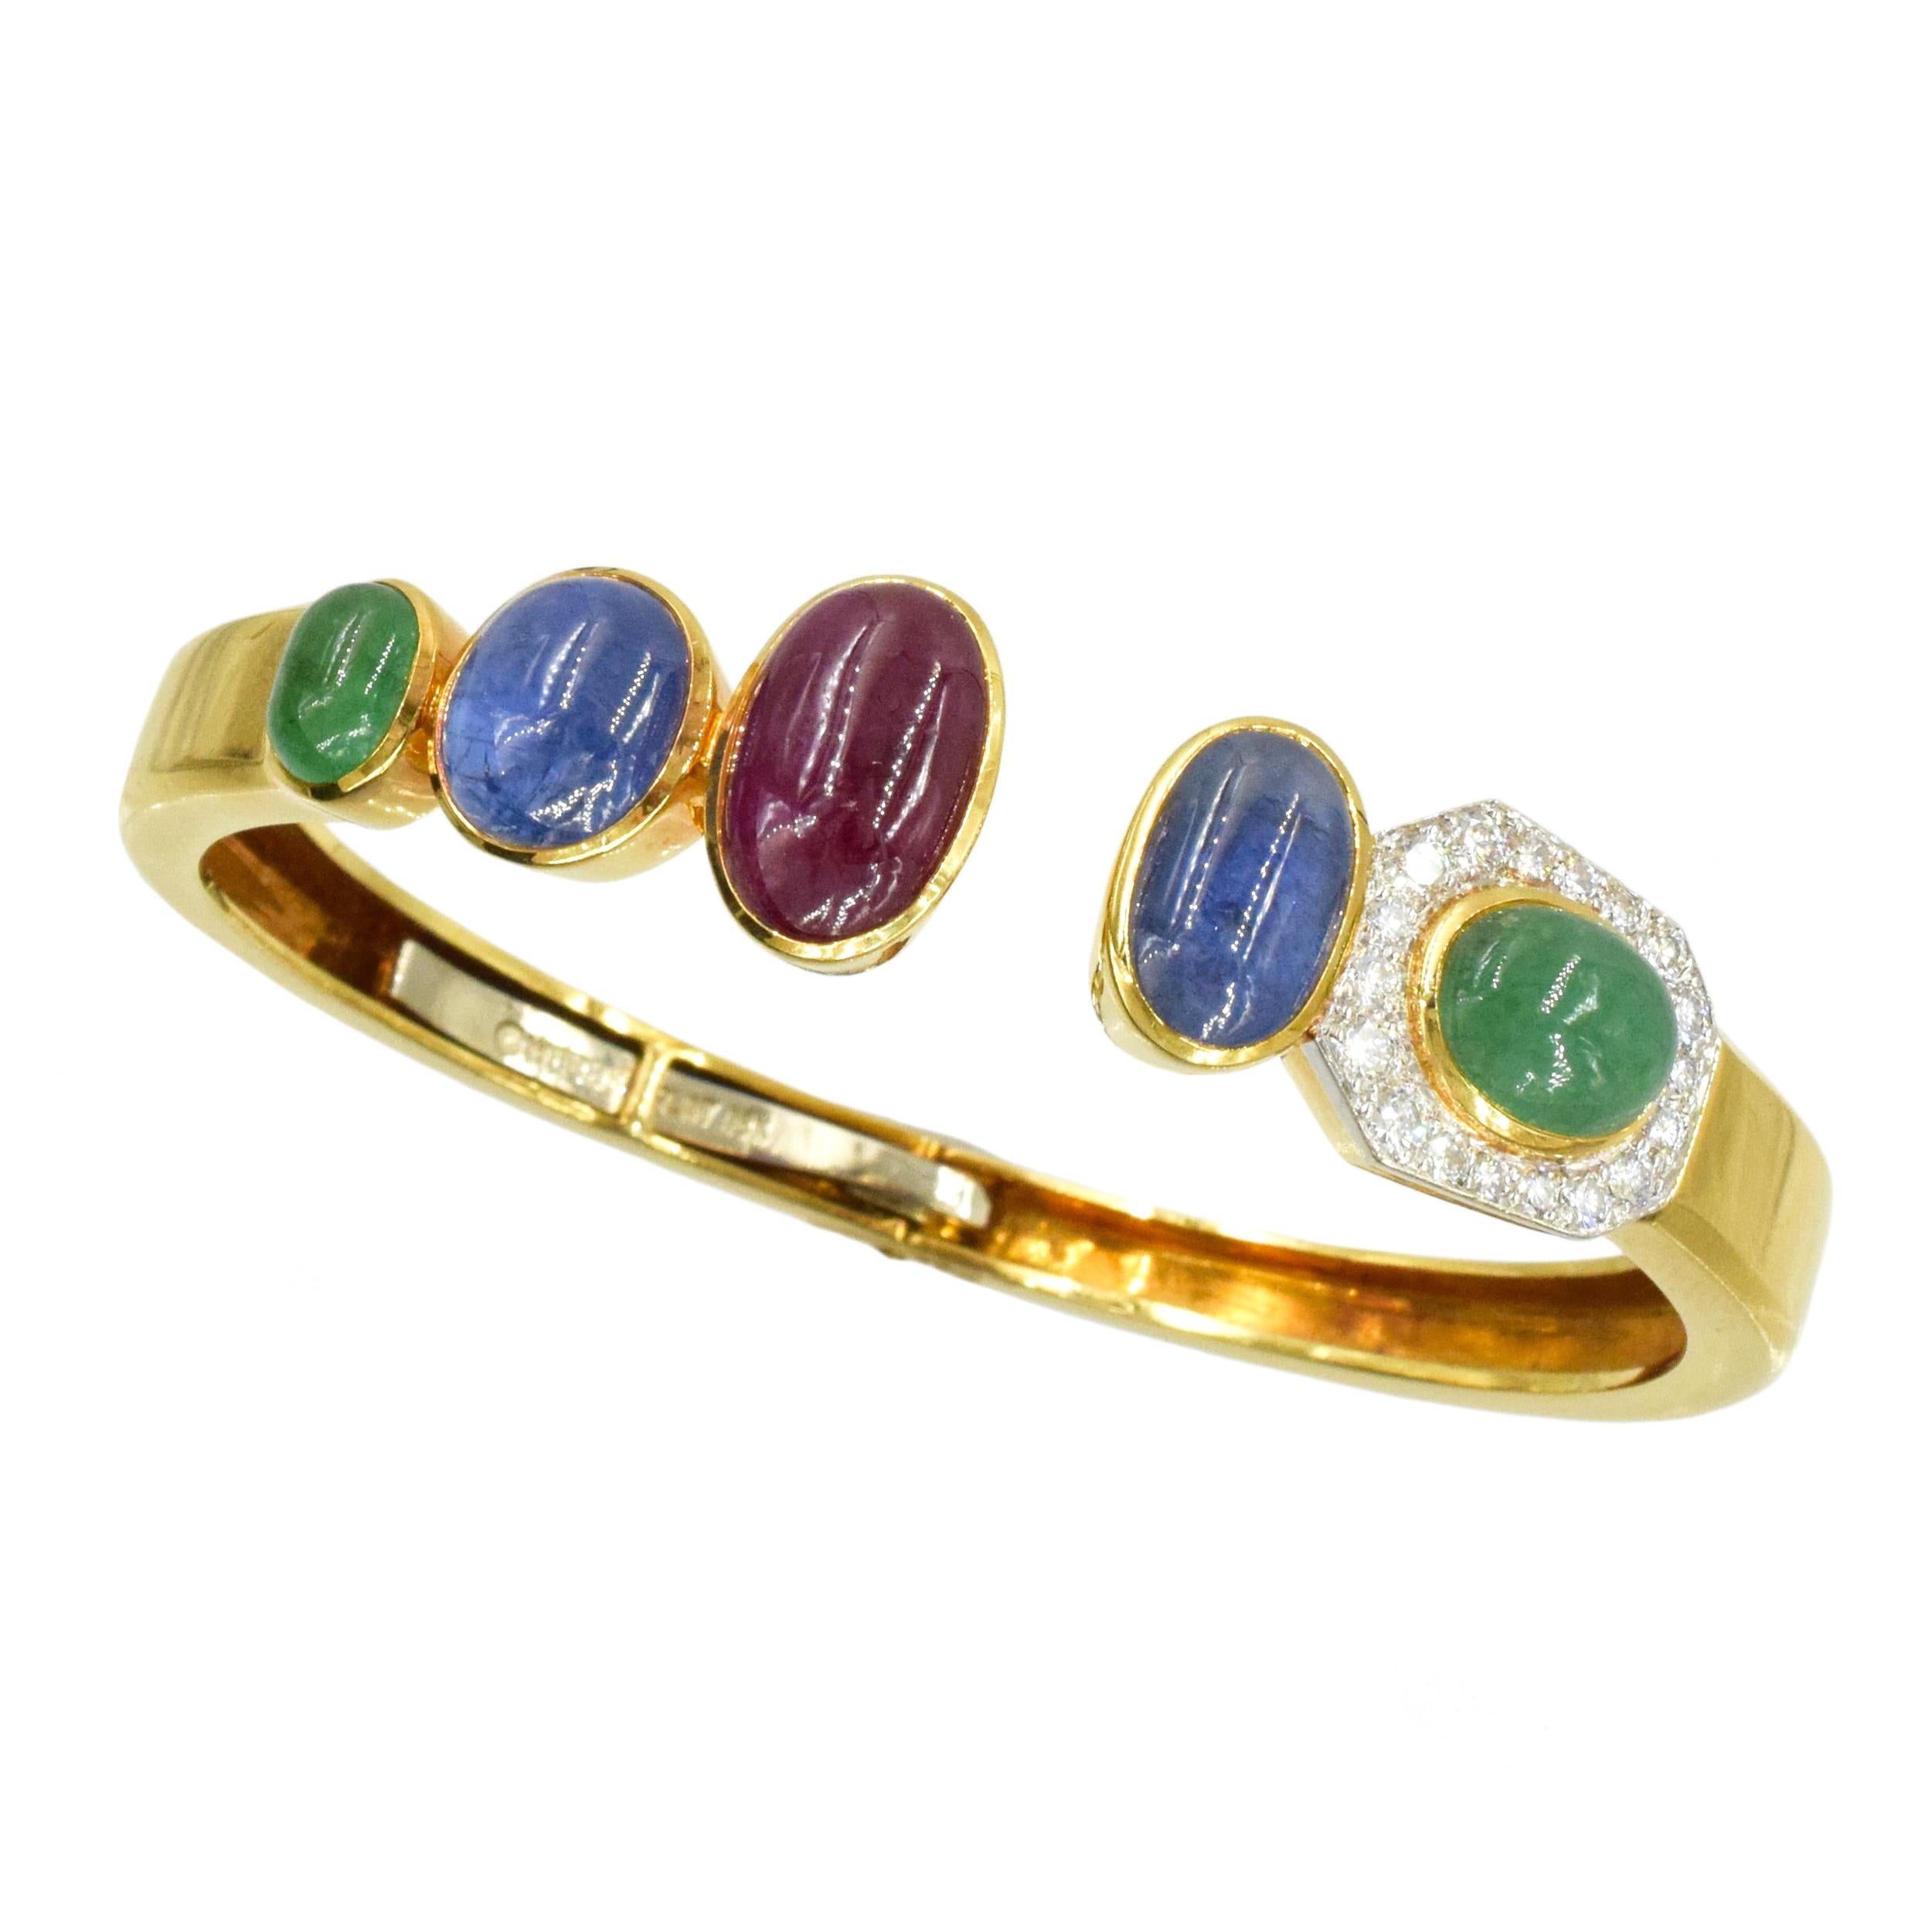 David Webb Gold, Platinum, Cabochon Colored Stone an Diamond Bangle Bracelet This polished bangle asymmetrically topped by one oval cabochon ruby and 4 sapphires and
emeralds, one of the emeralds framed by 18 round diamonds ap. .60 carats
signed